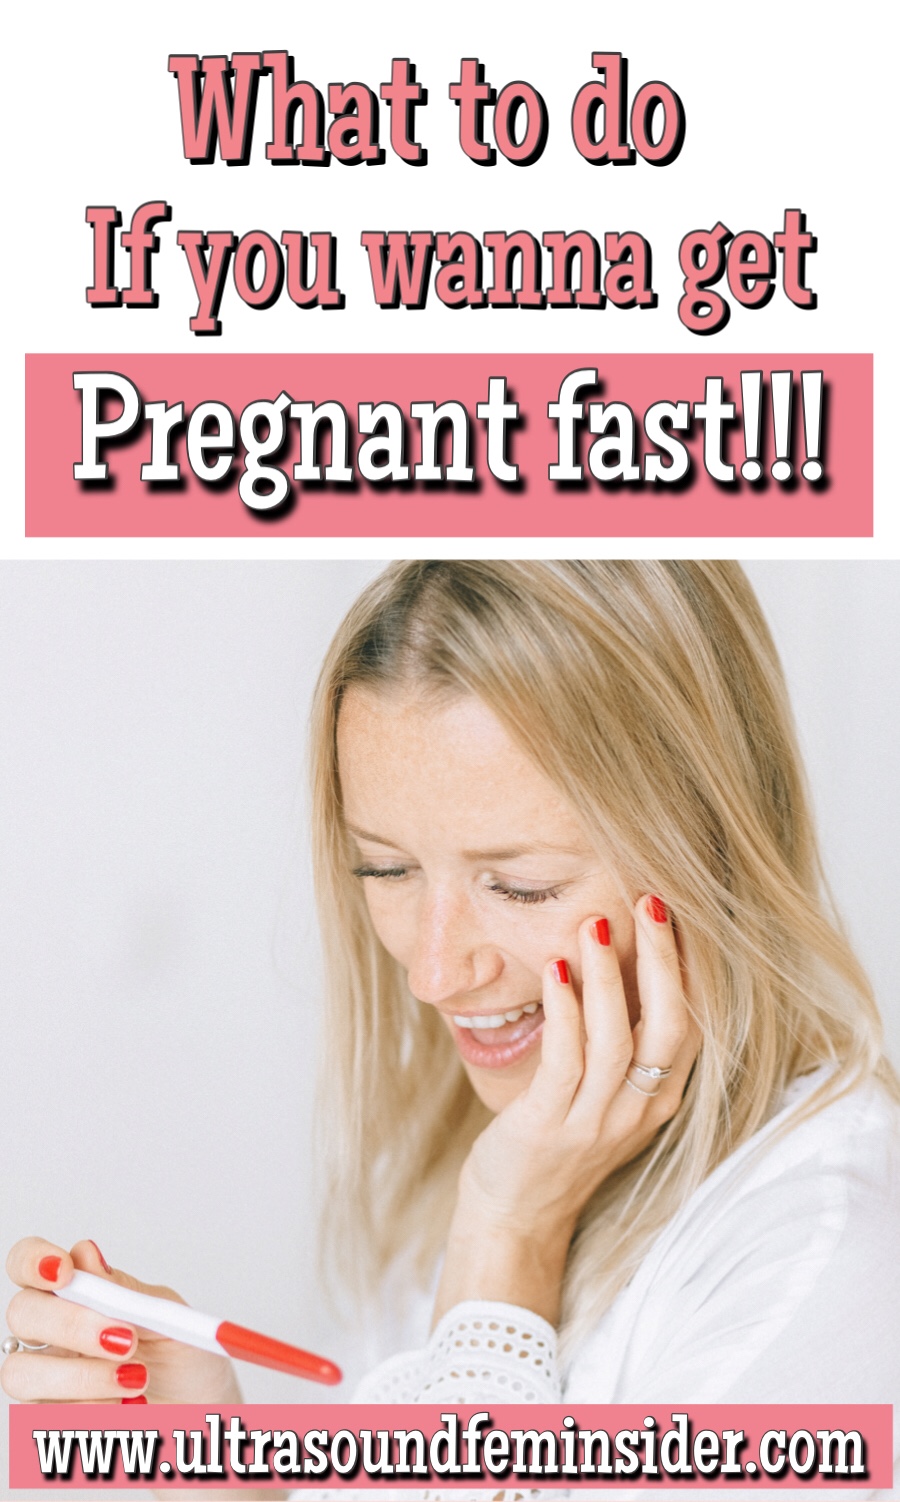 Tips to get pregnant fast. Tips to increase fertility naturally. 